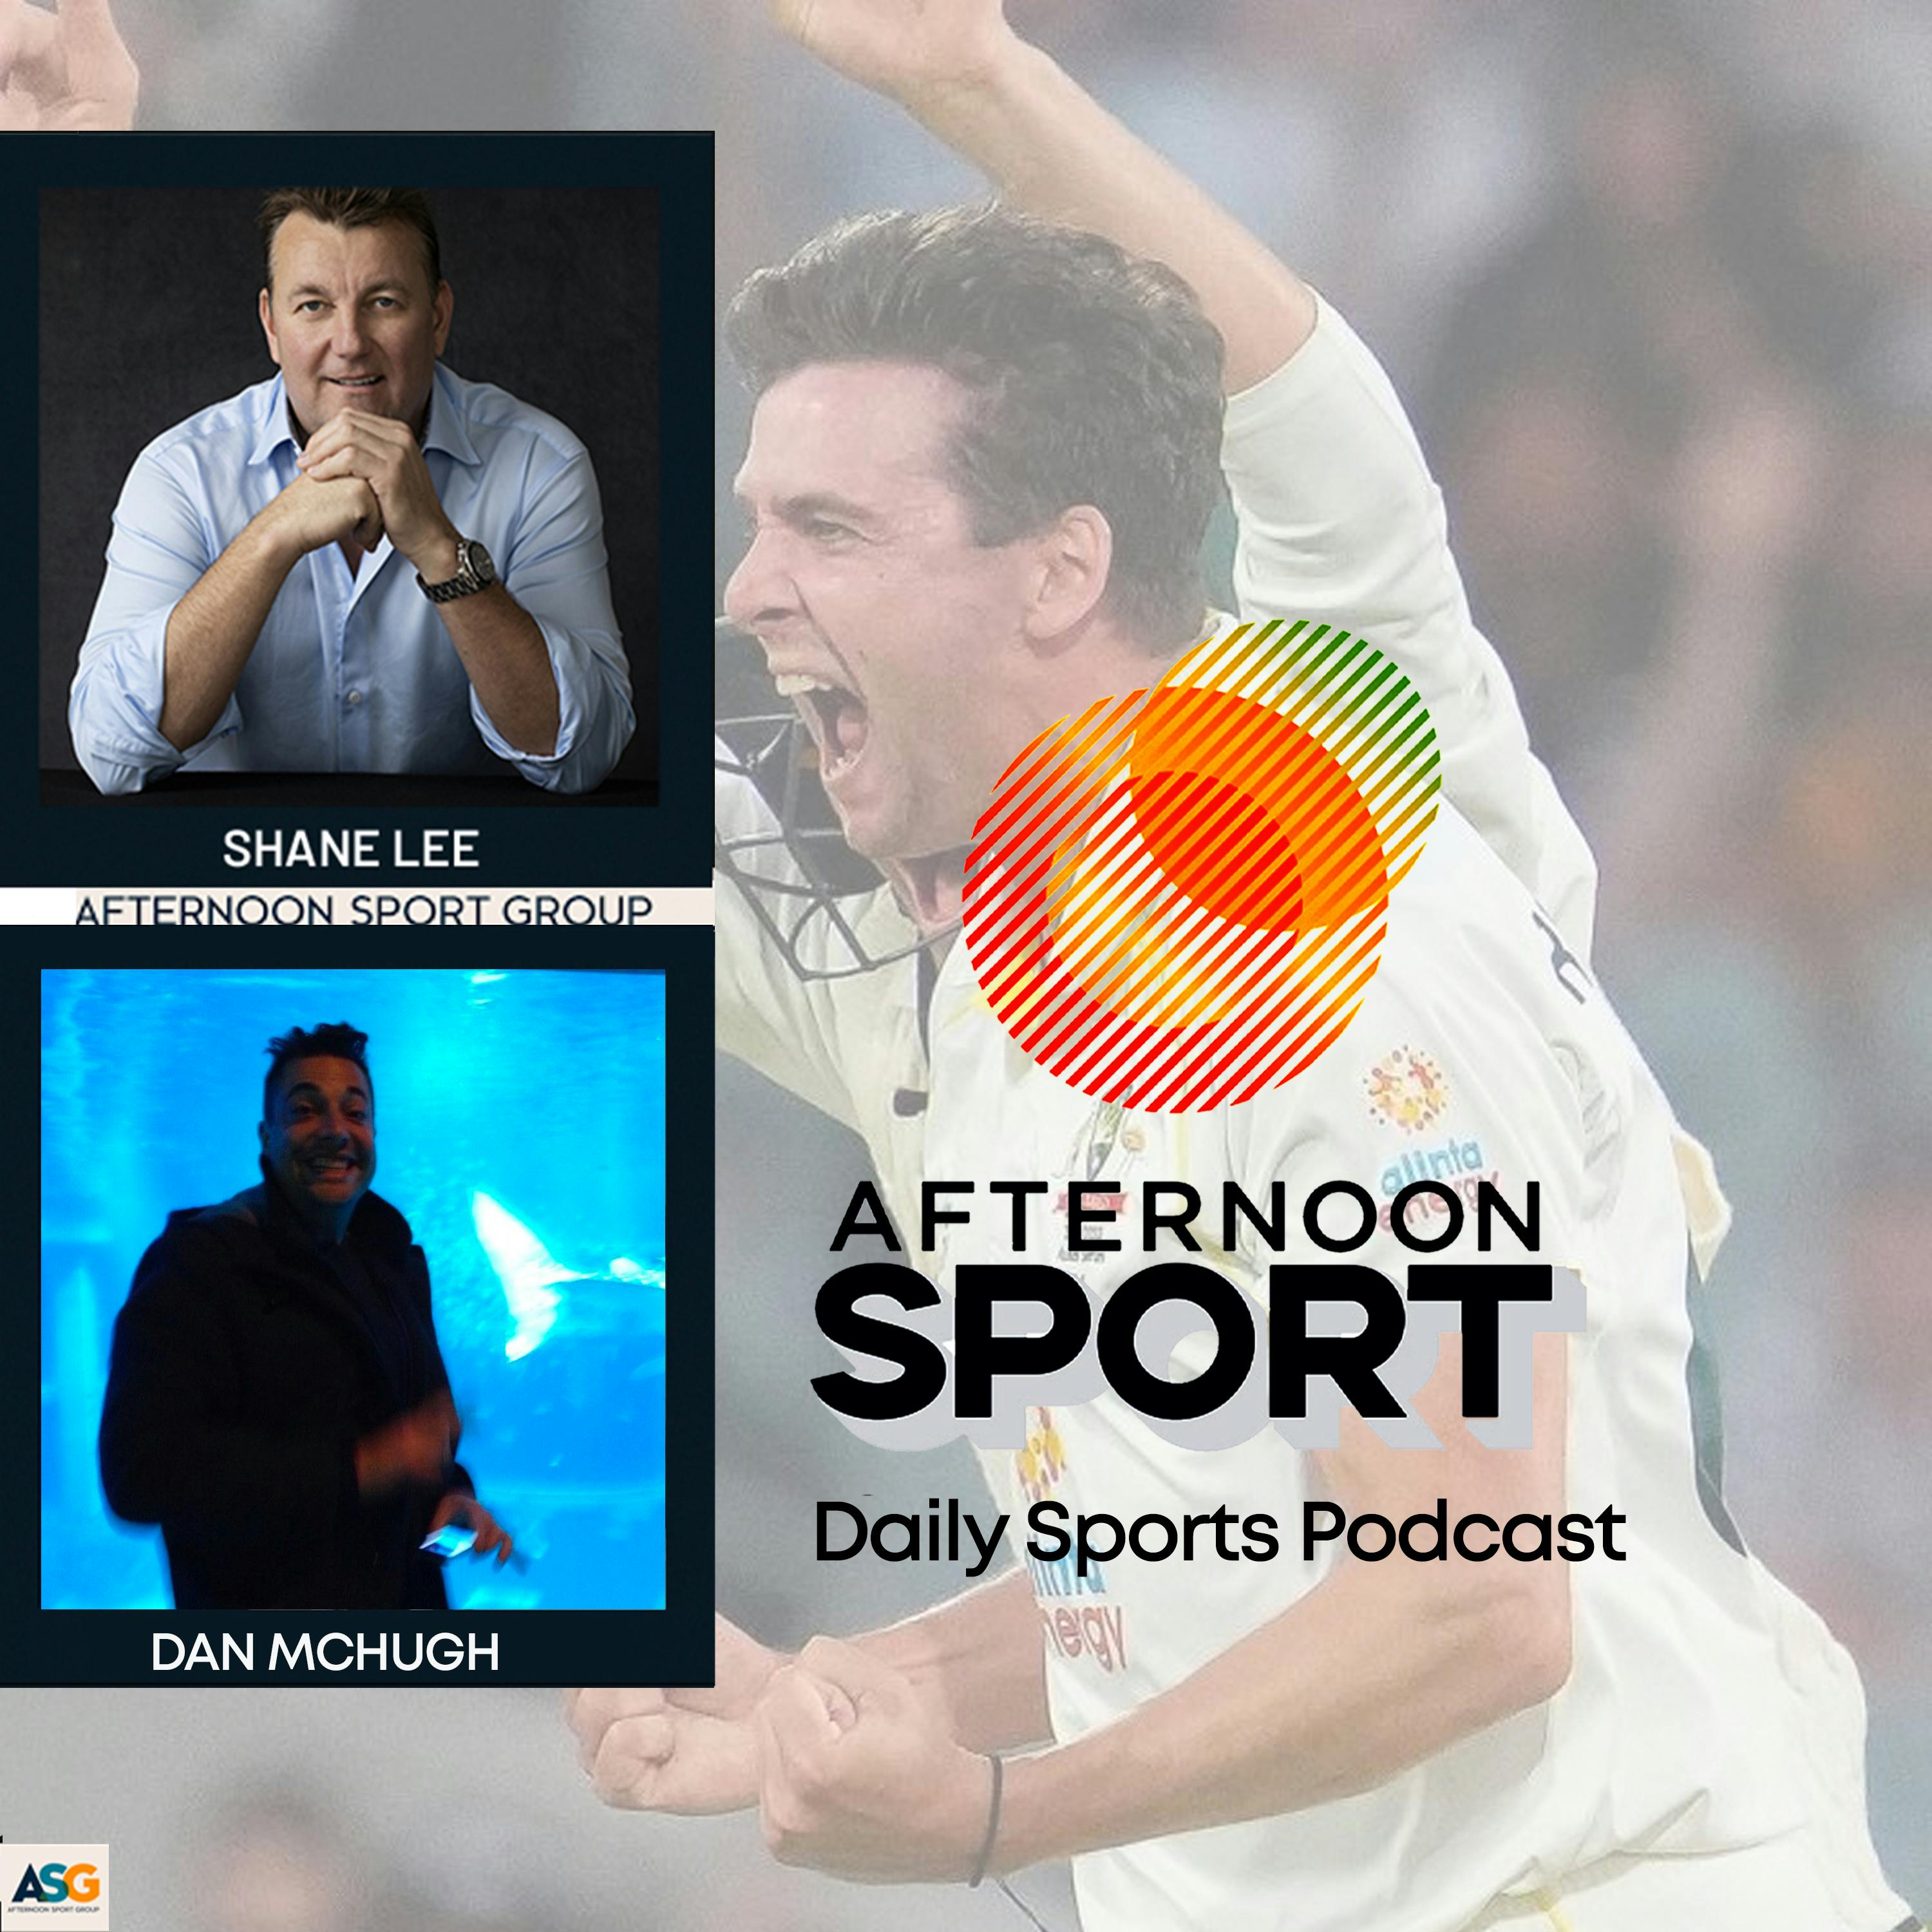 19th April Deep Dive: Vale Cameron Guthrie, Josh Giddey to join the Green & Gold at the 2023 FIBA World Cup, Boston Marathon, NRL poaching Union coaches and much more!